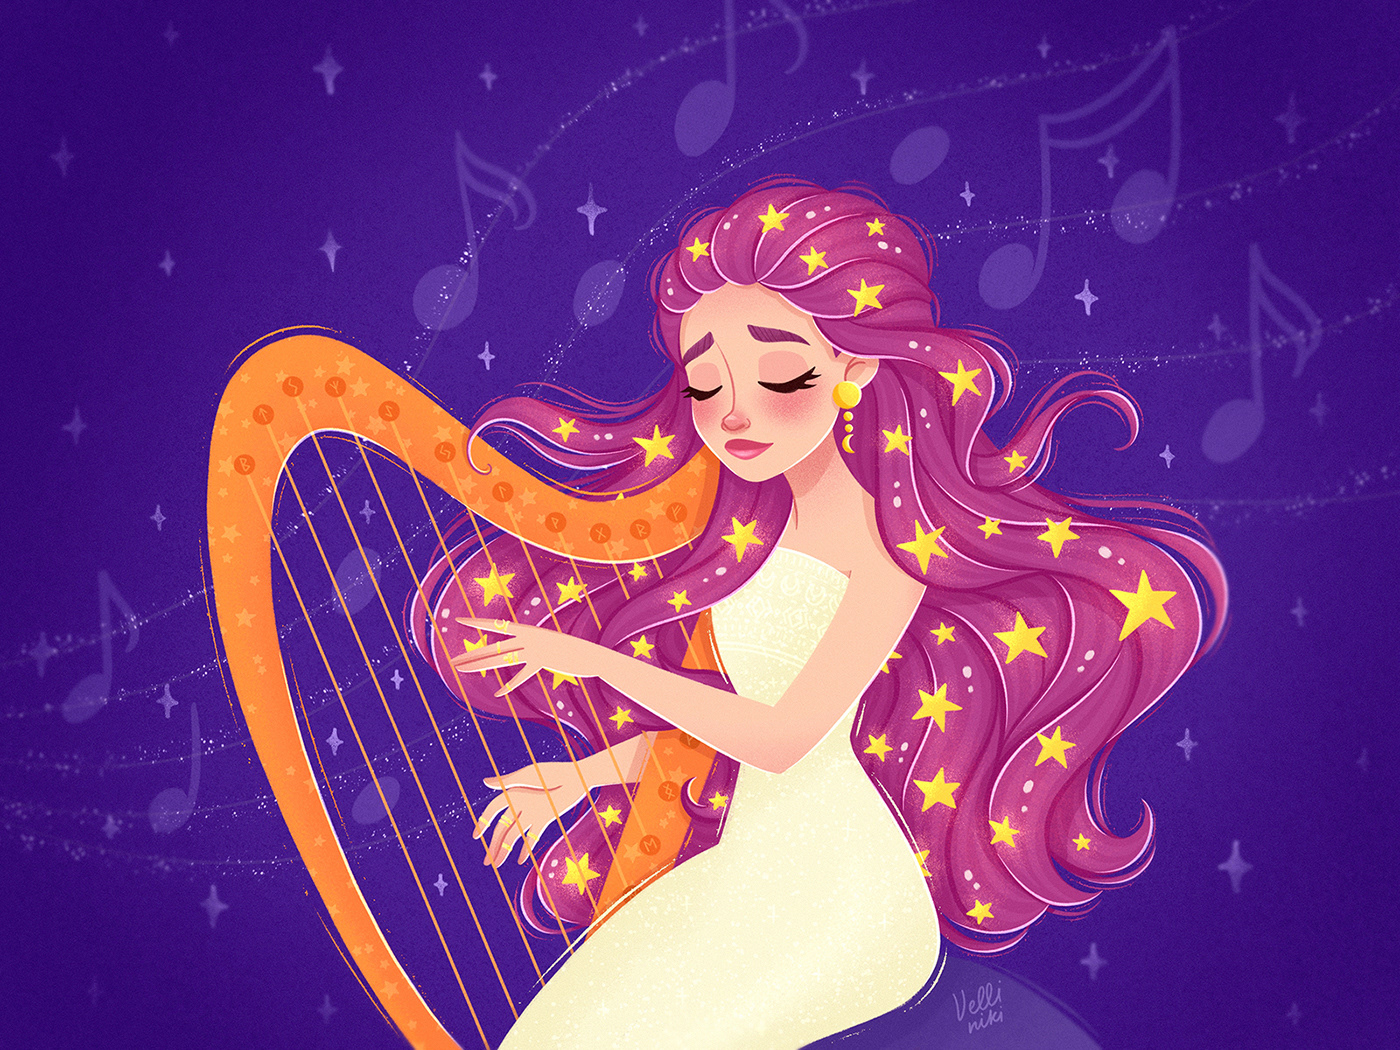 The Maiden who plays the harp and wears stars in the hair.